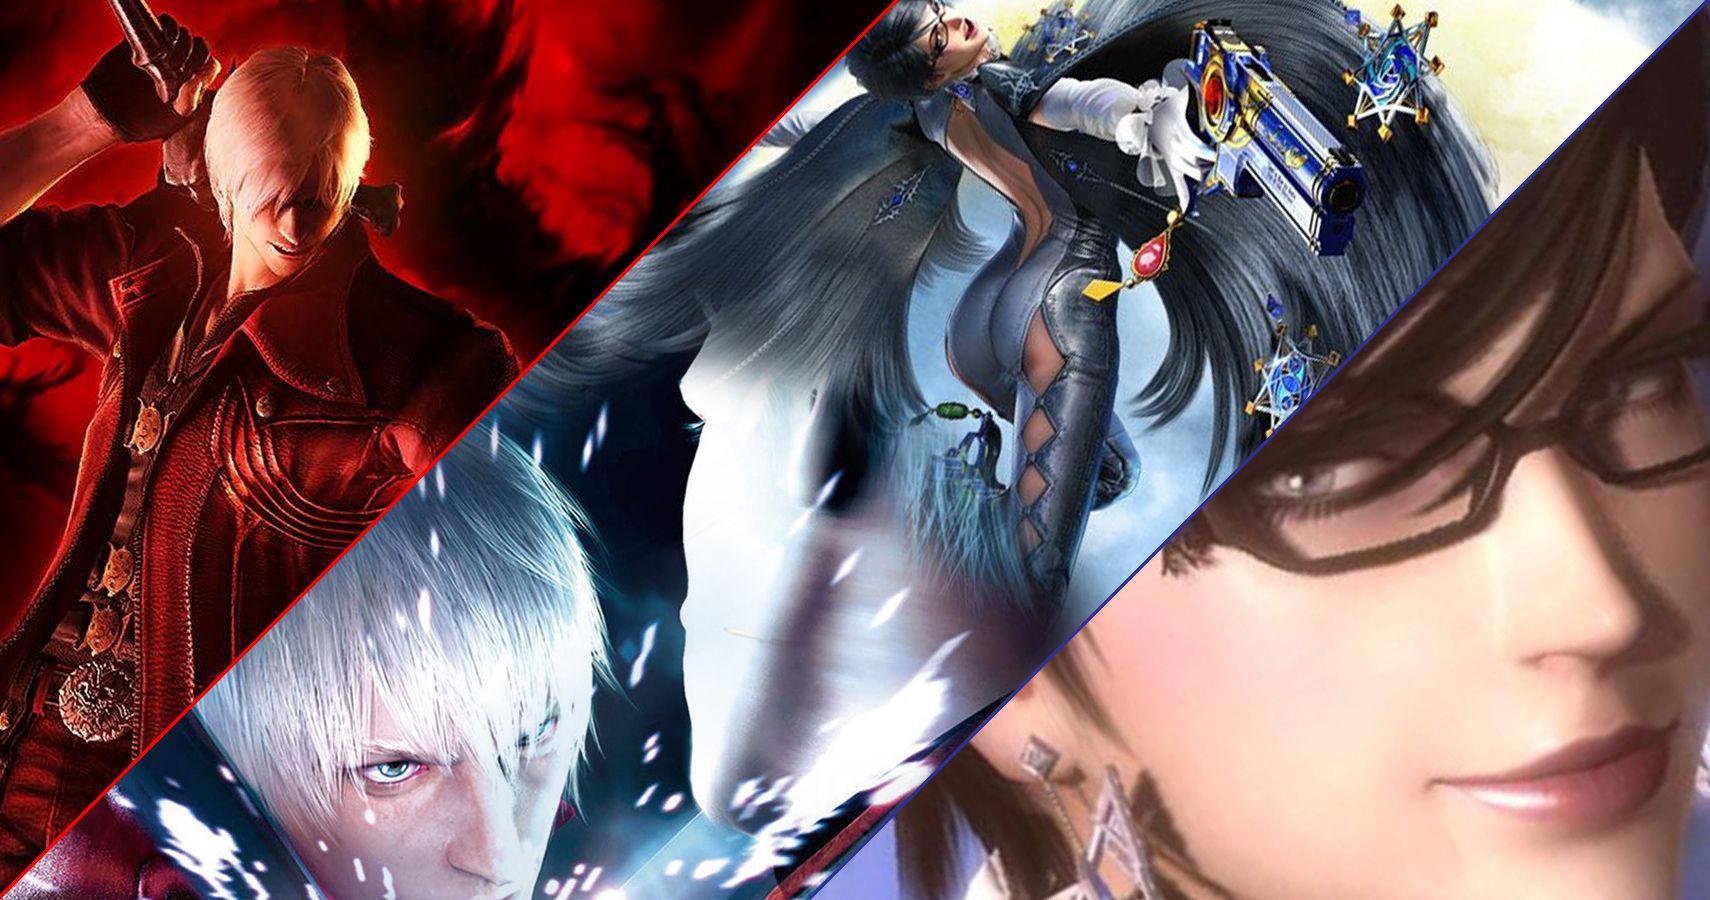 5 Things Bayonetta Does Better Than Devil May Cry (& 5 That DMC Does Better)